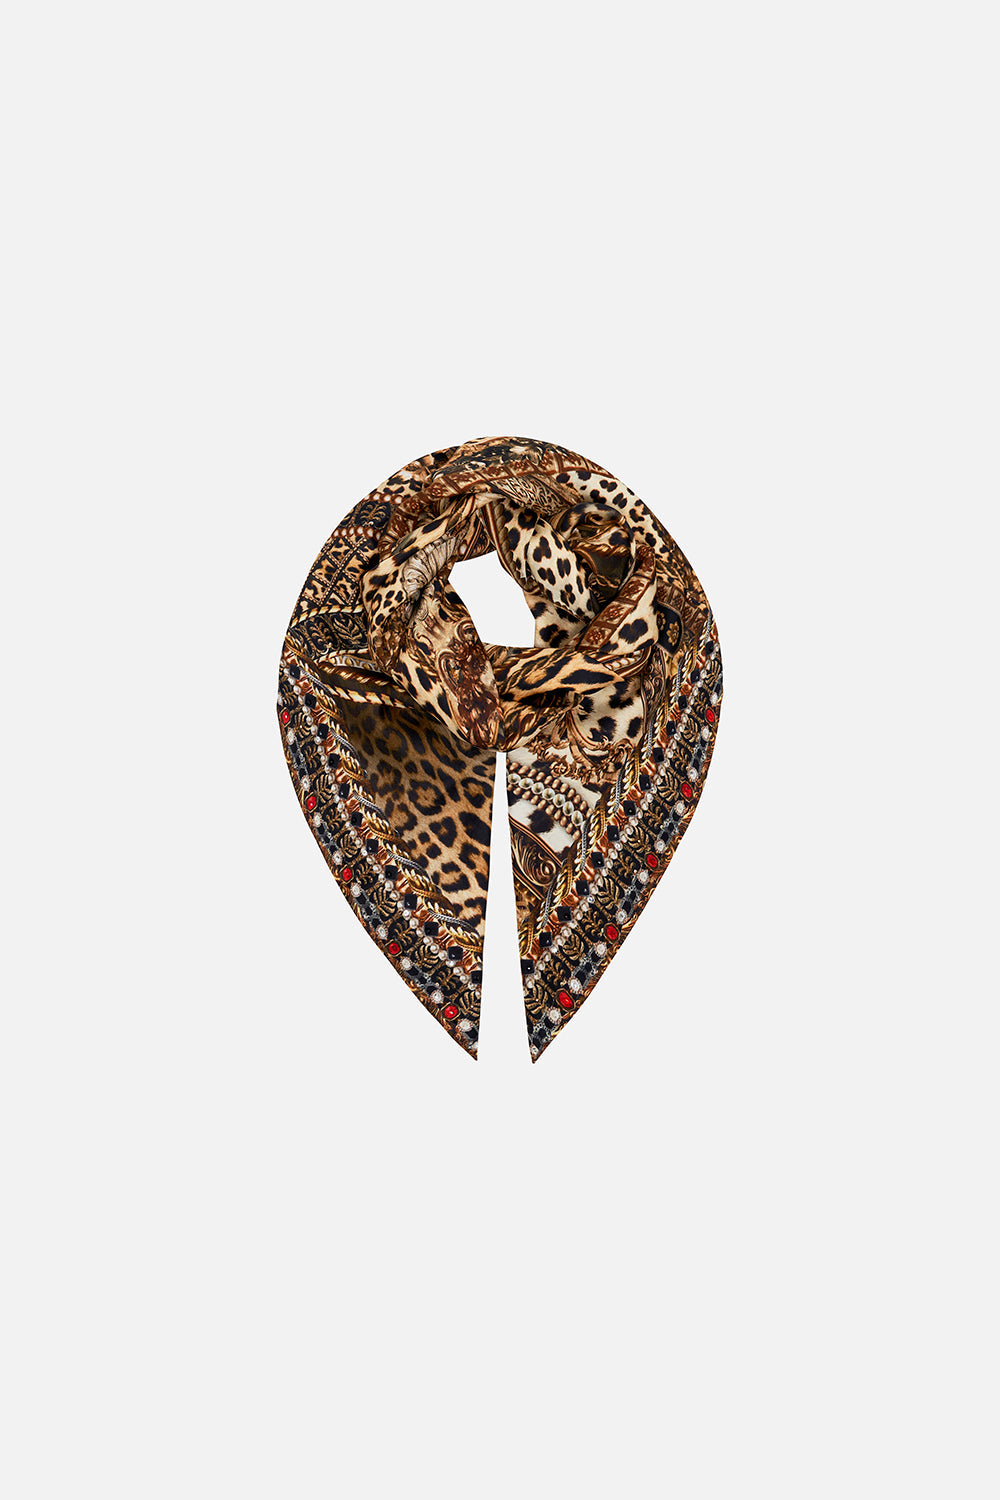 Product view of CAMILLA large leopard print silk square scarf in Standing ovation print 